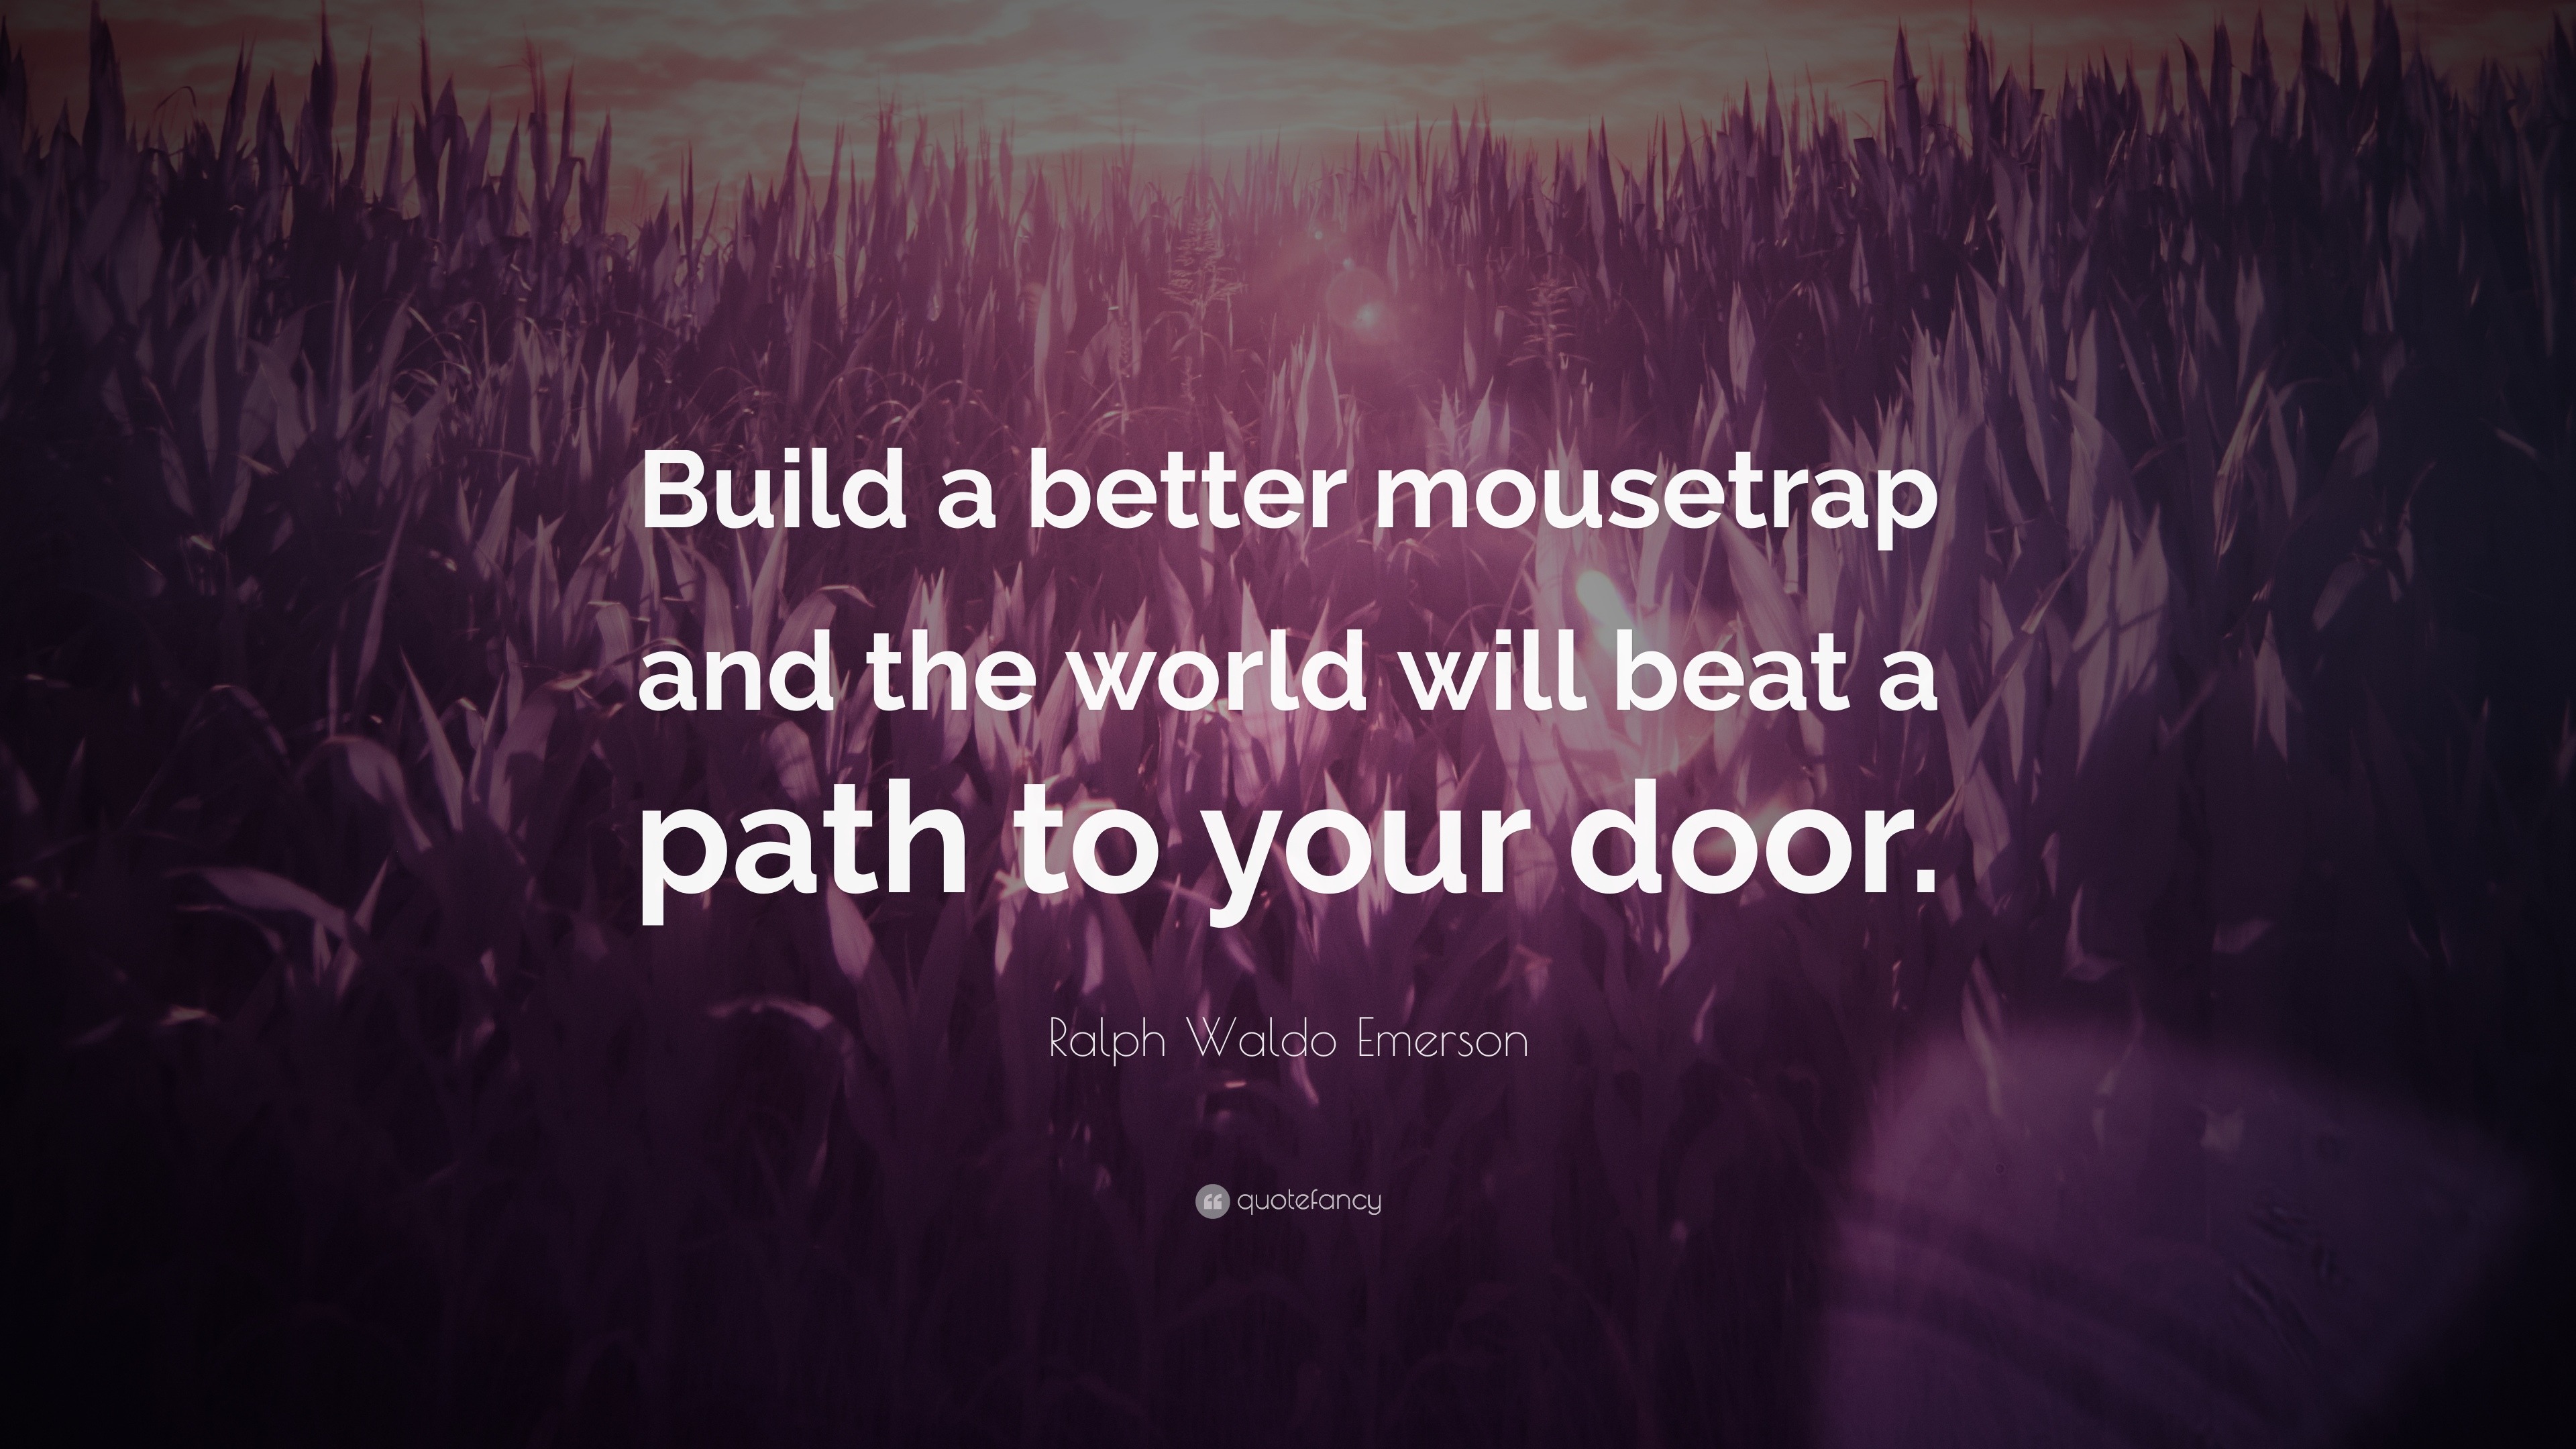 If You Build a Better Mousetrap, the World Will Beat a Path to Your Door